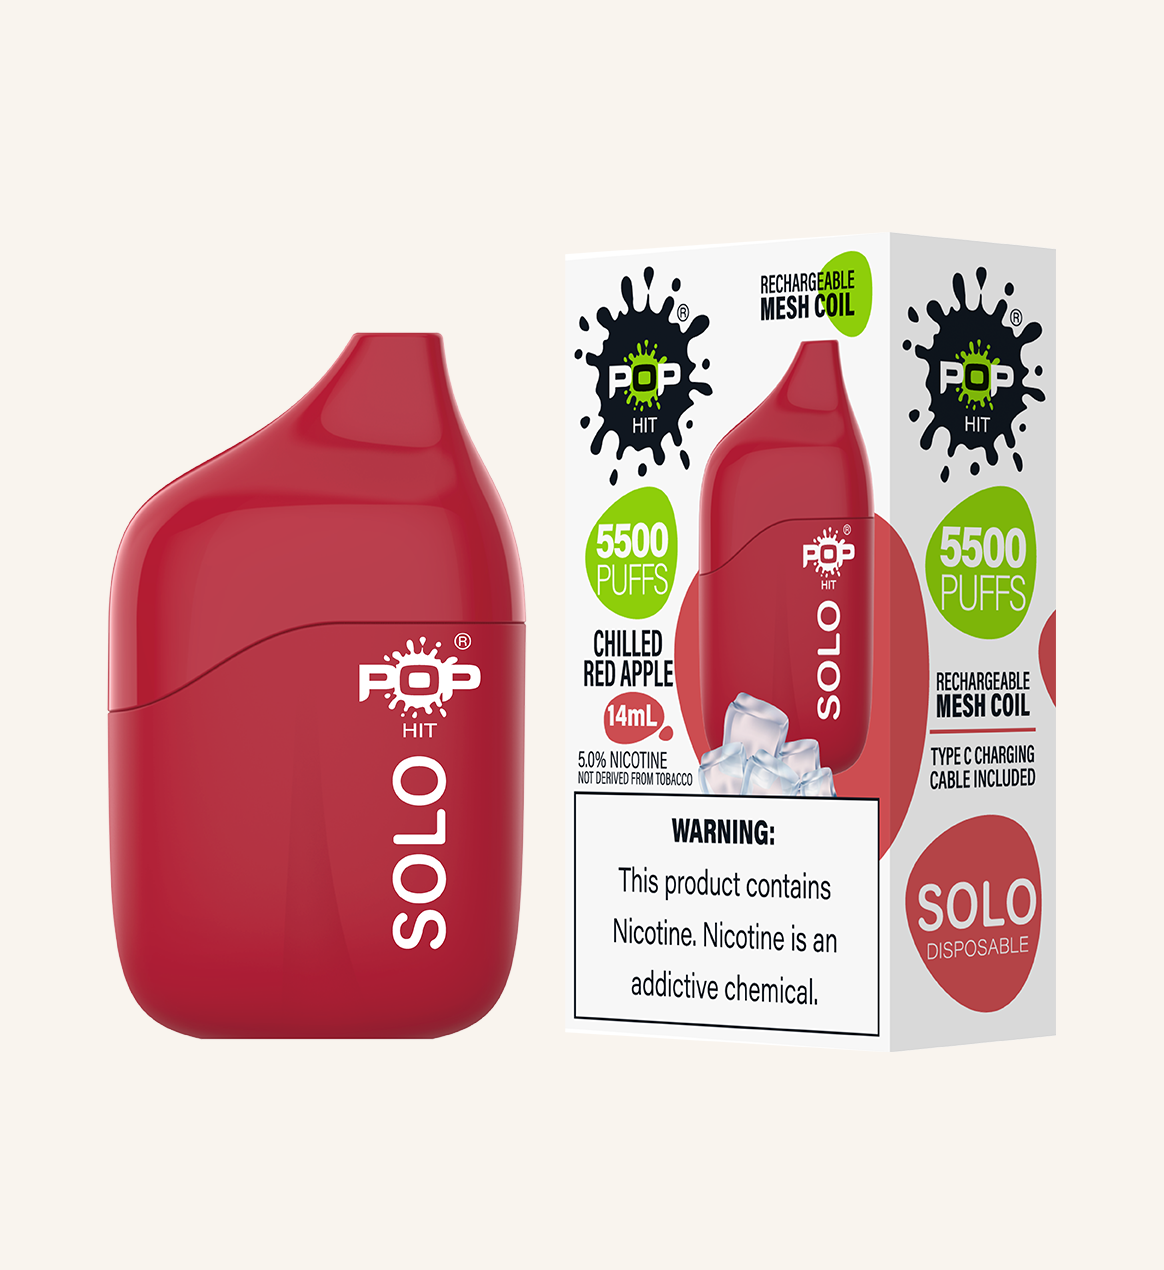 Pop Solo Disposable Device – Chilled Red Apple